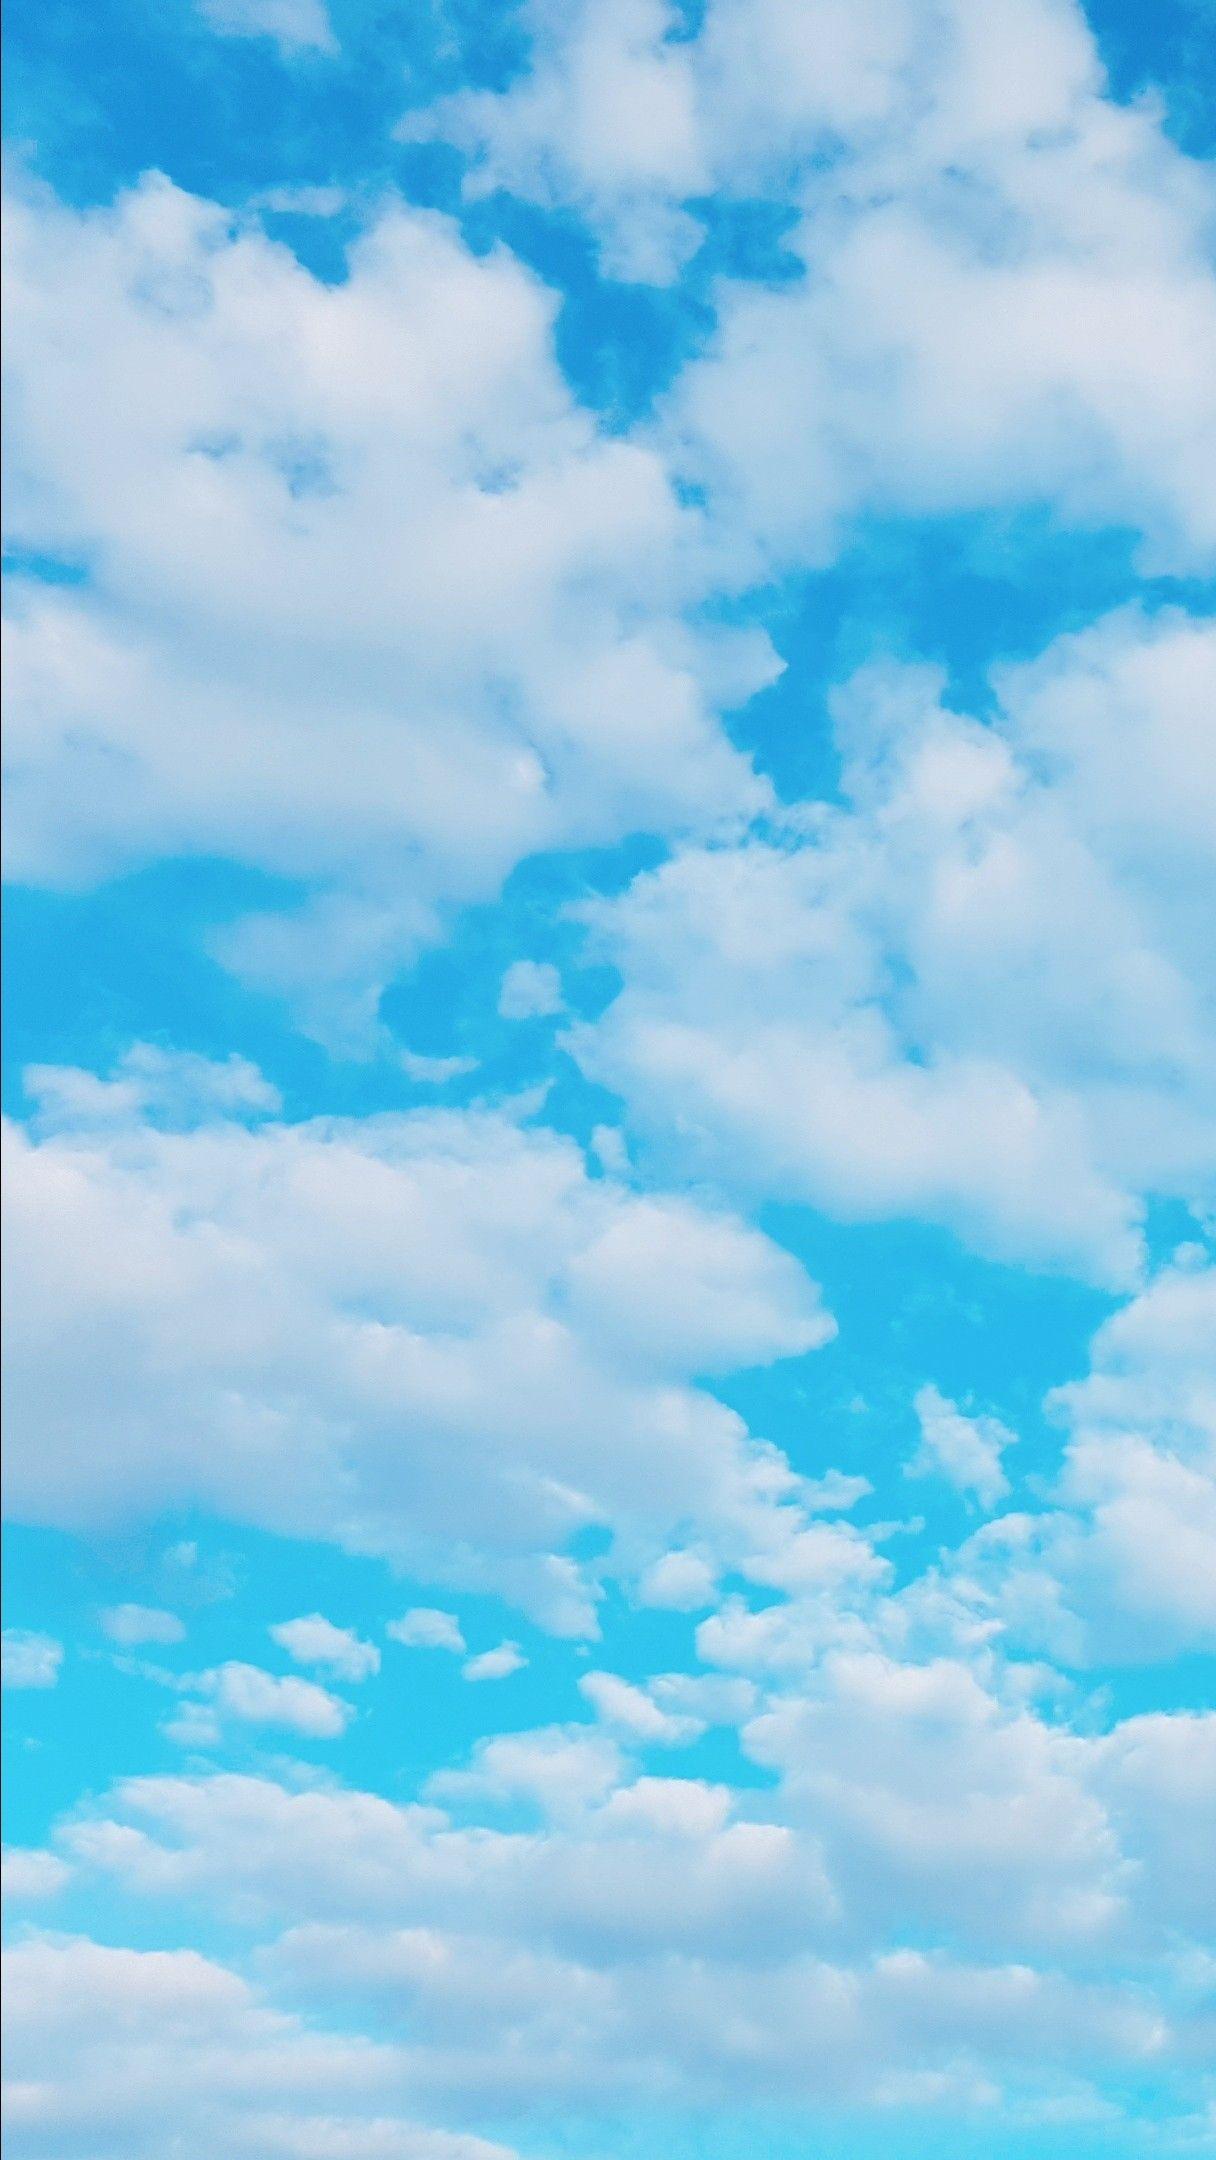 Top 999+ Calm Aesthetic Wallpaper Full HD, 4K✓Free to Use